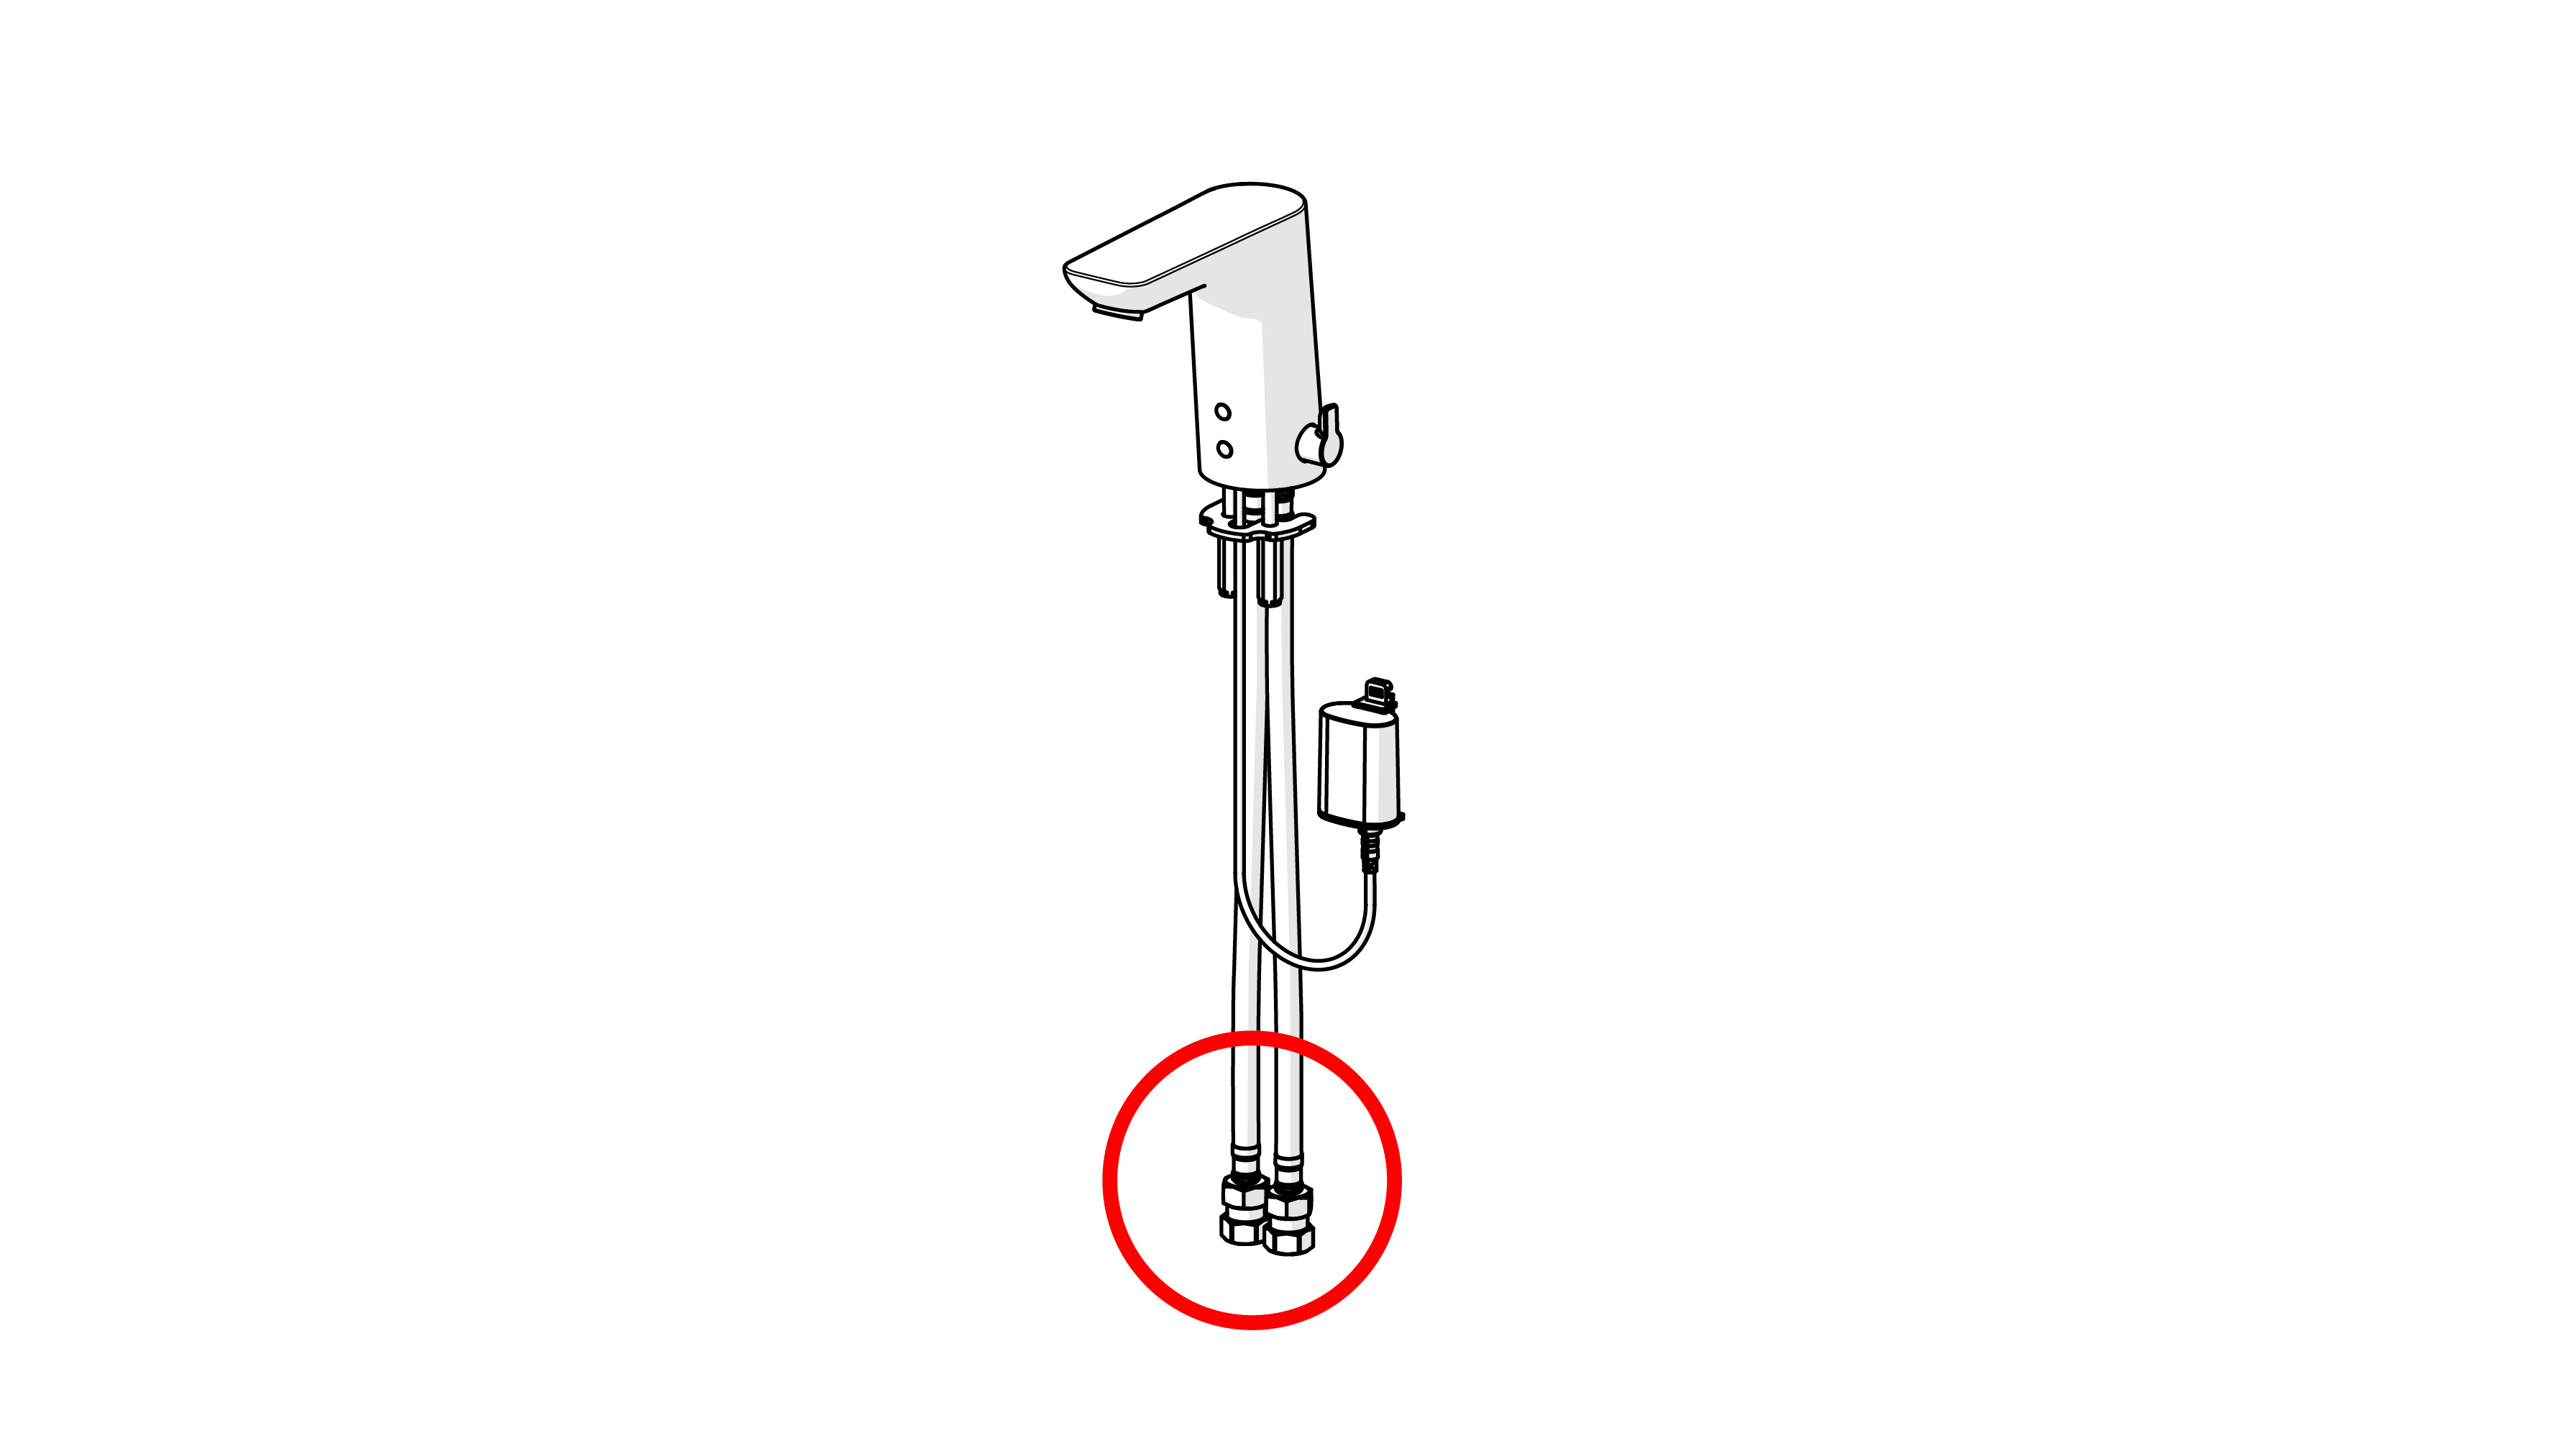  The non return valves and litter filters should be mounted at the end of the connection pipes/hoses.